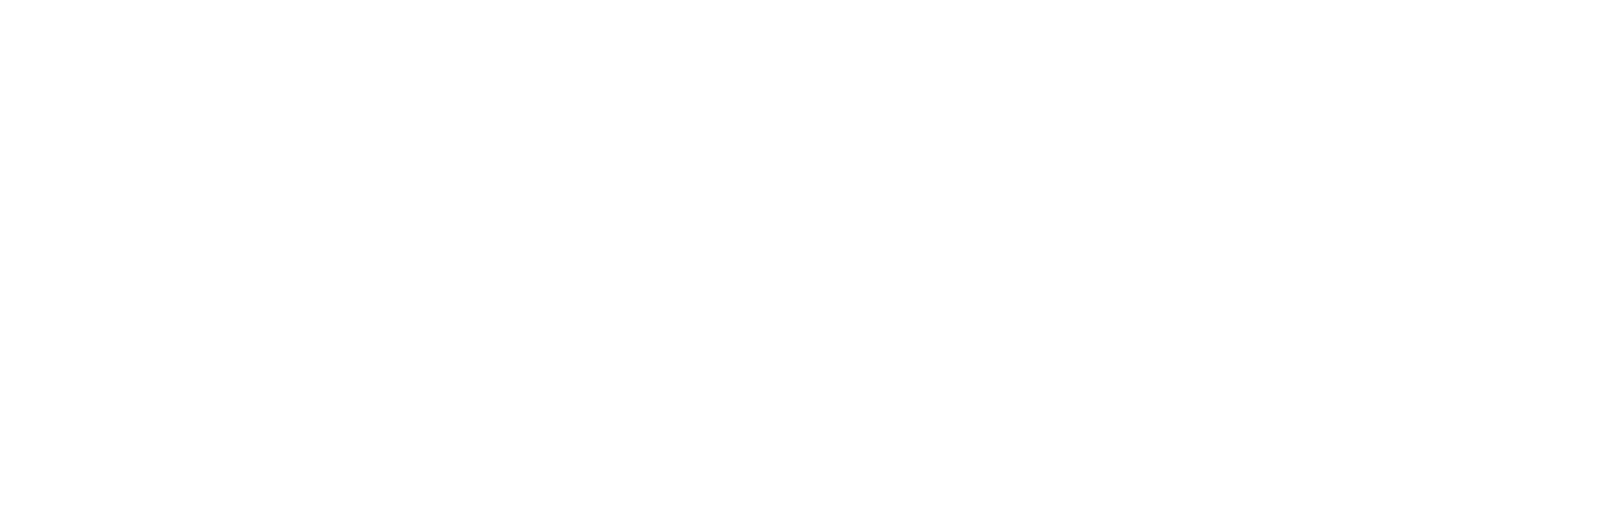 In Place of War logo.